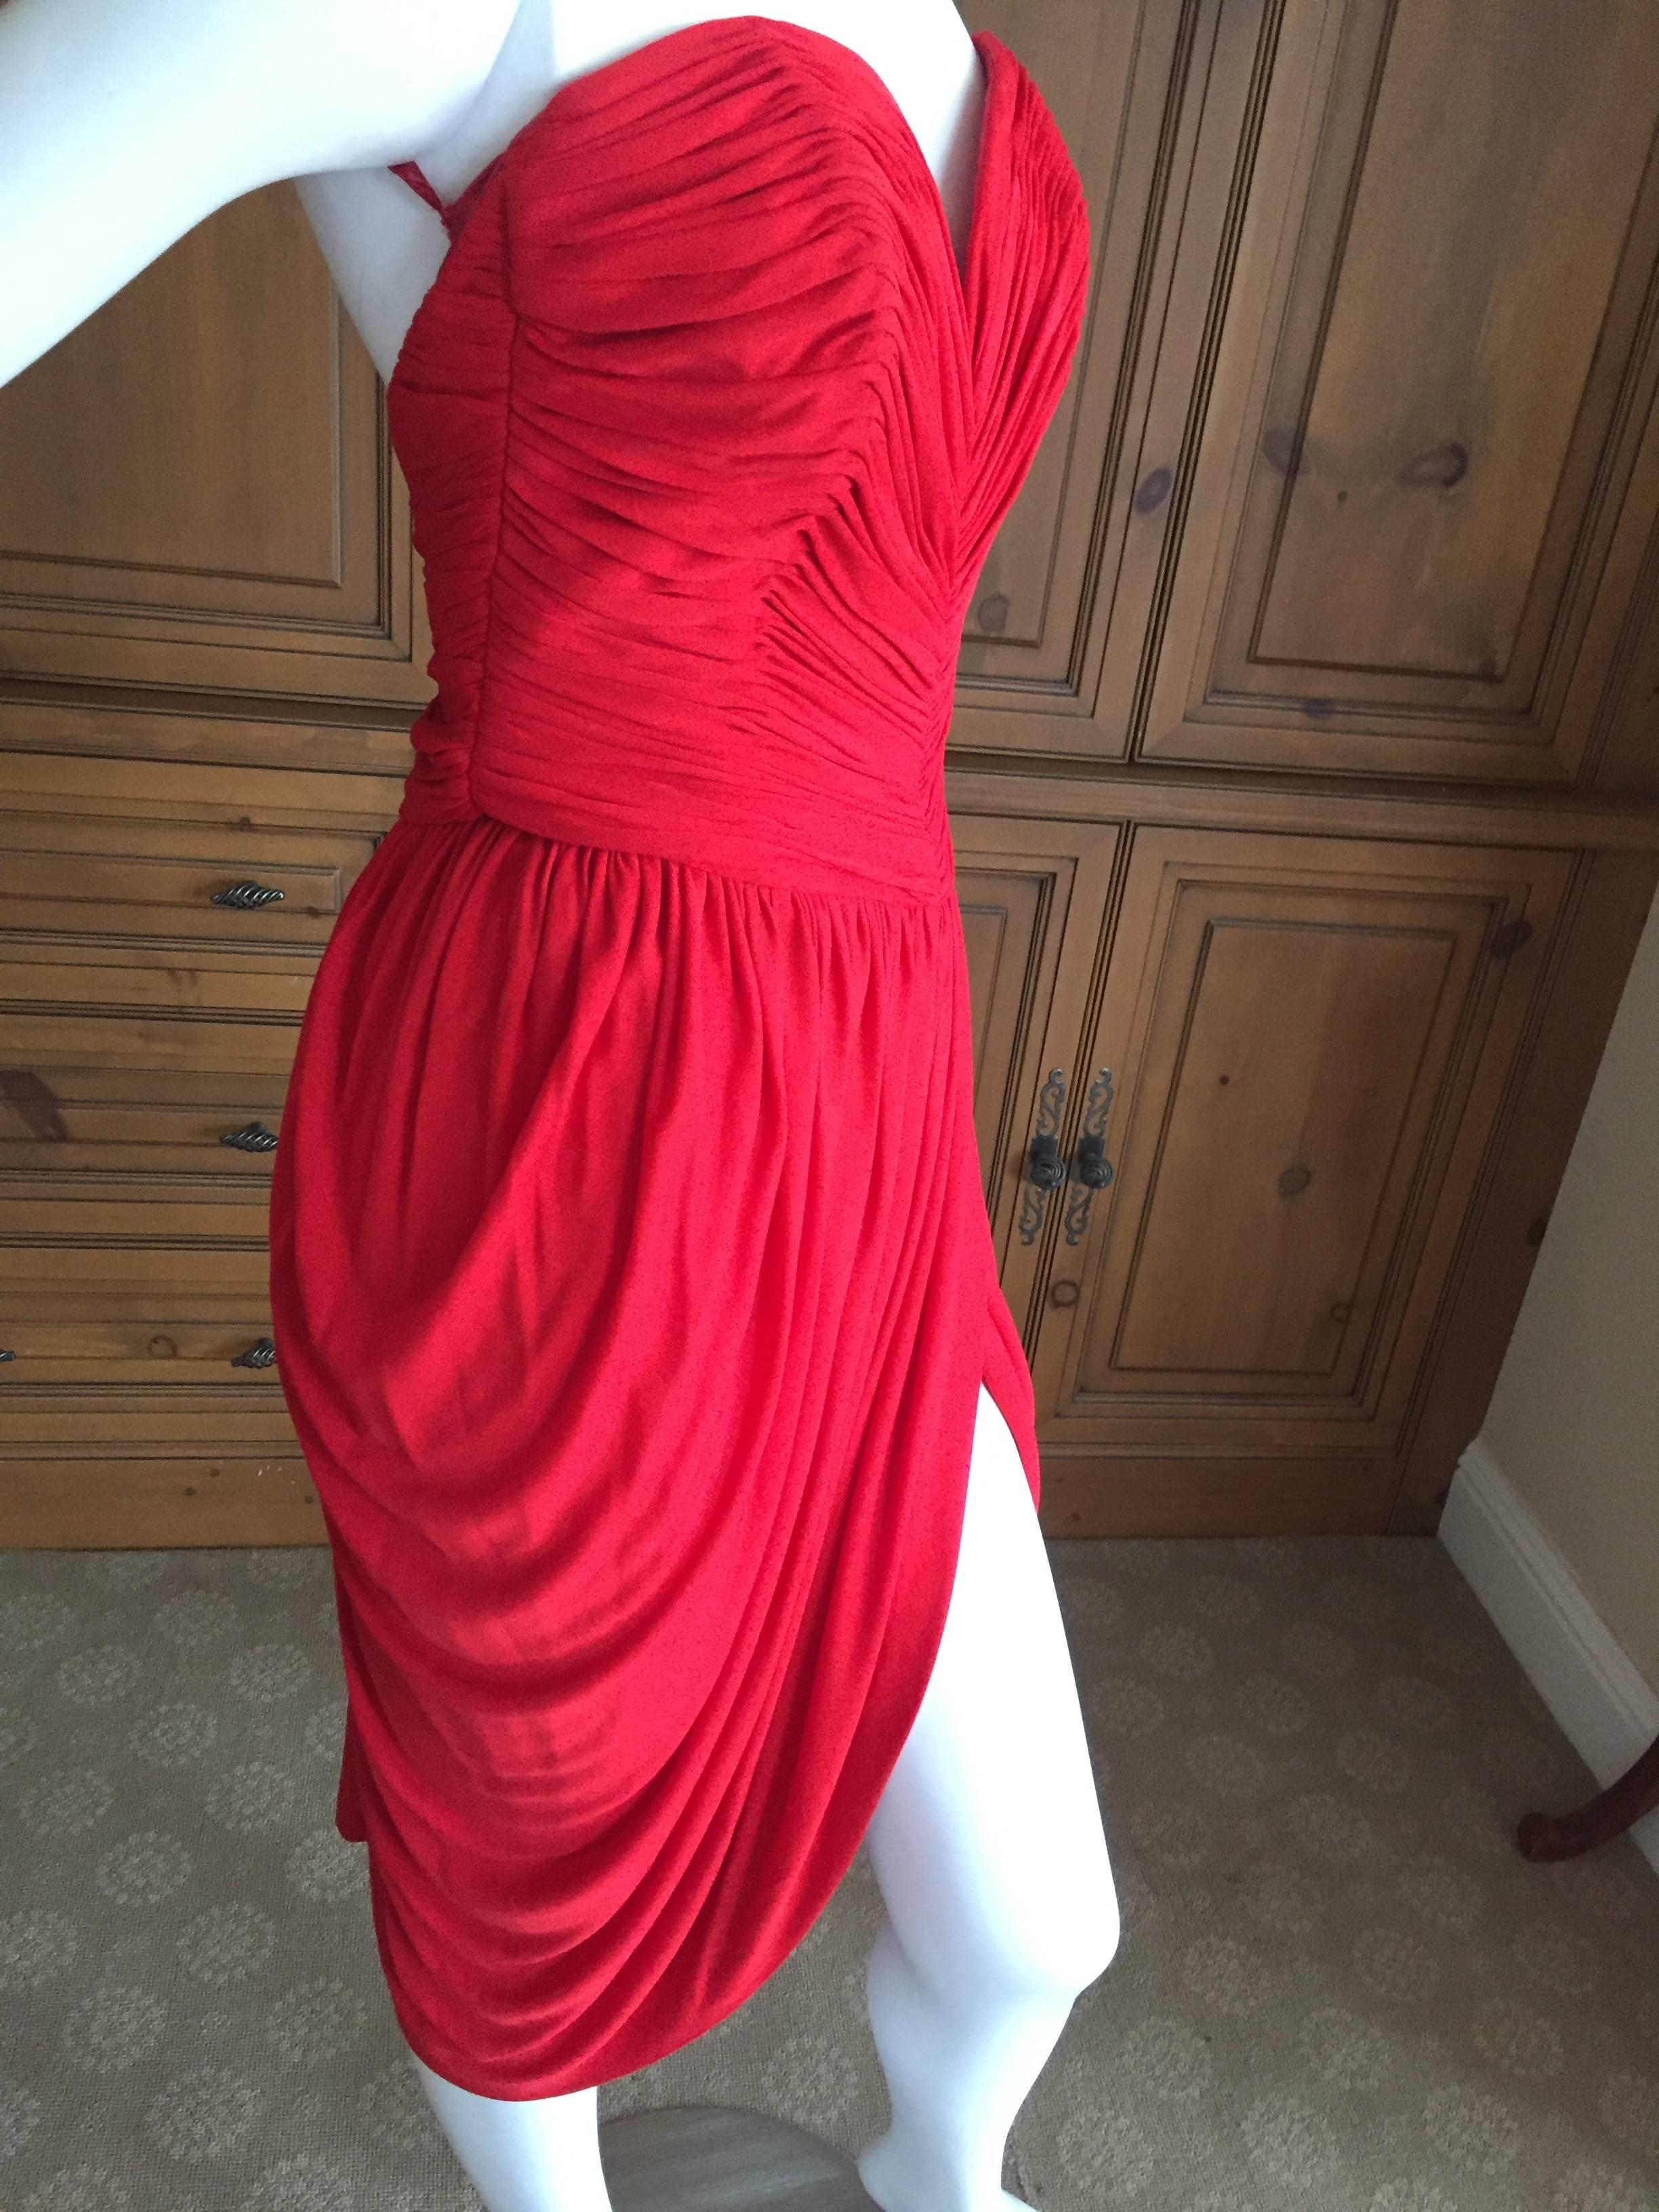 Vicky Tiel Sexy Red Cocktail Dress.
Shirred and pleated with a high slit at the skirt, this is  a knockout from Vicky Teil Paris.
Bust 34